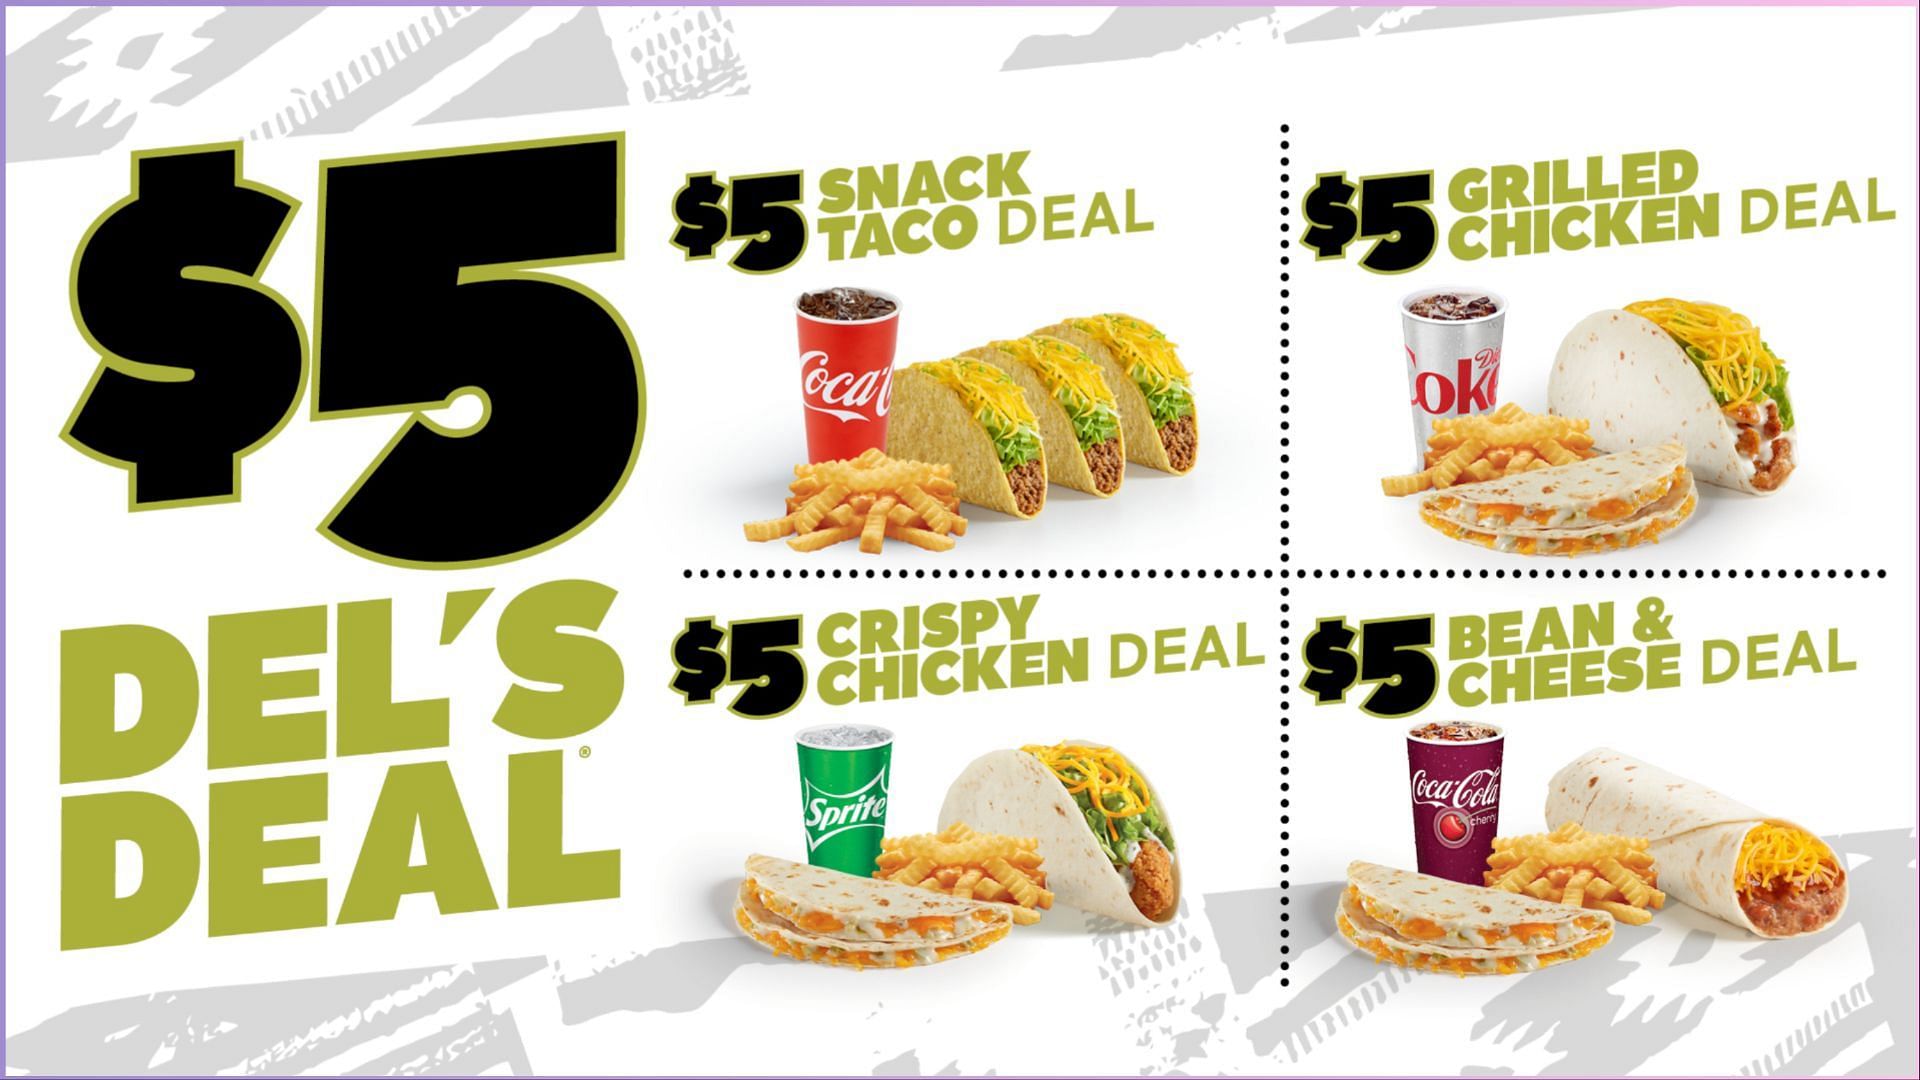 fans can enjoy the new $5 Del&rsquo;s Deal&reg; Value Meals starting April 13 at all participating restaurants across the country (Image via Del Taco)